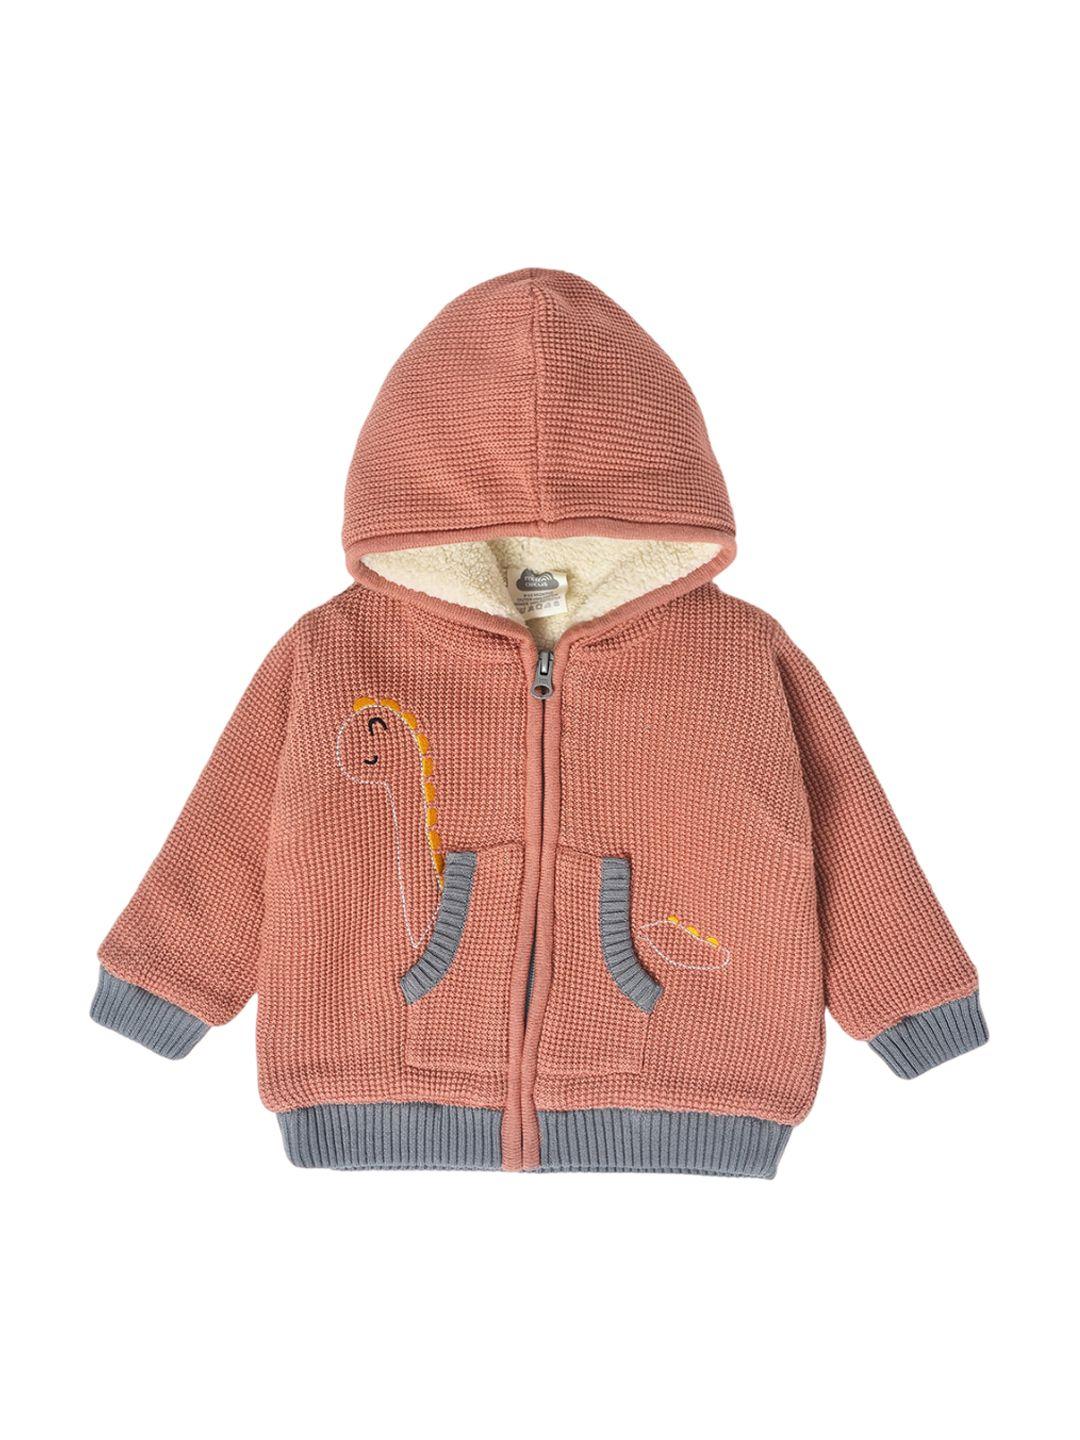 unisex kids hooded jacket with embroidery